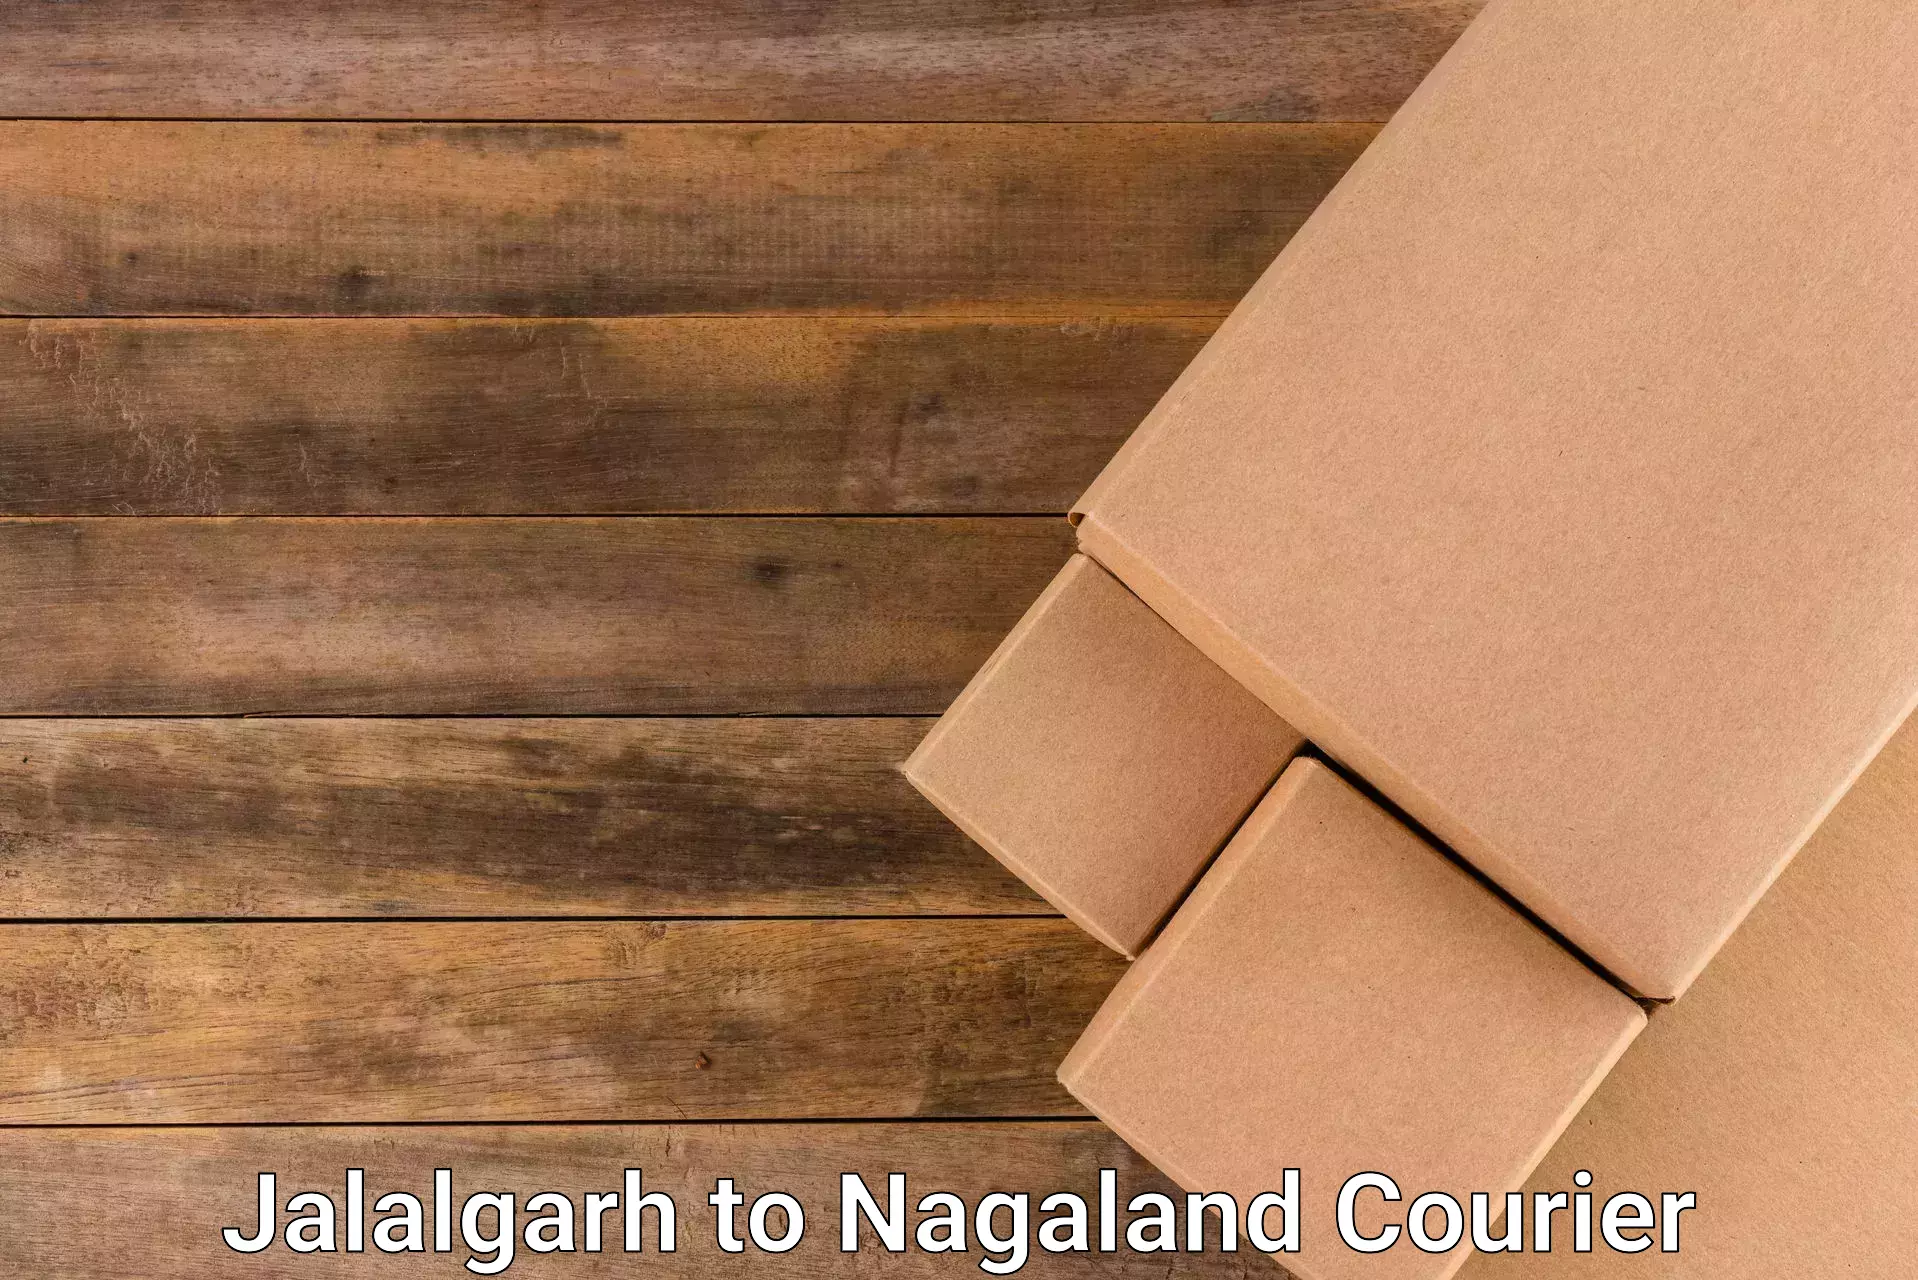 Full-service courier options Jalalgarh to Mon